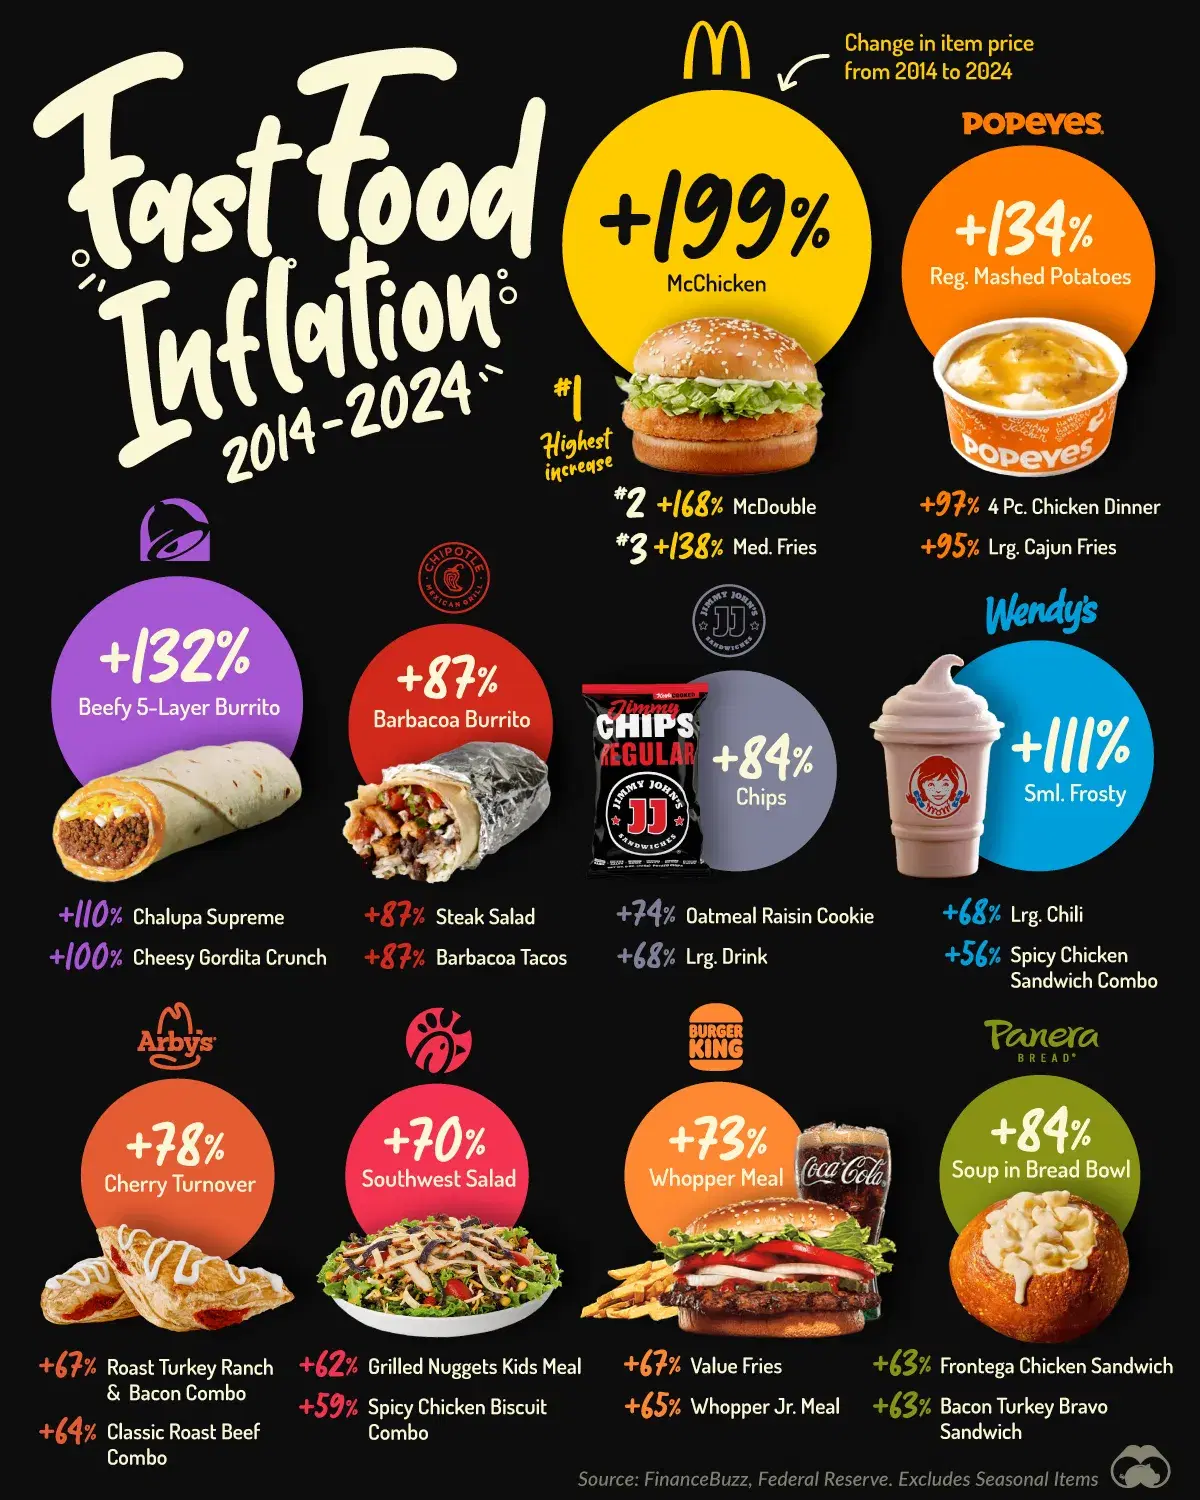 The Fast Food Items with the Biggest Price Increases 🍟